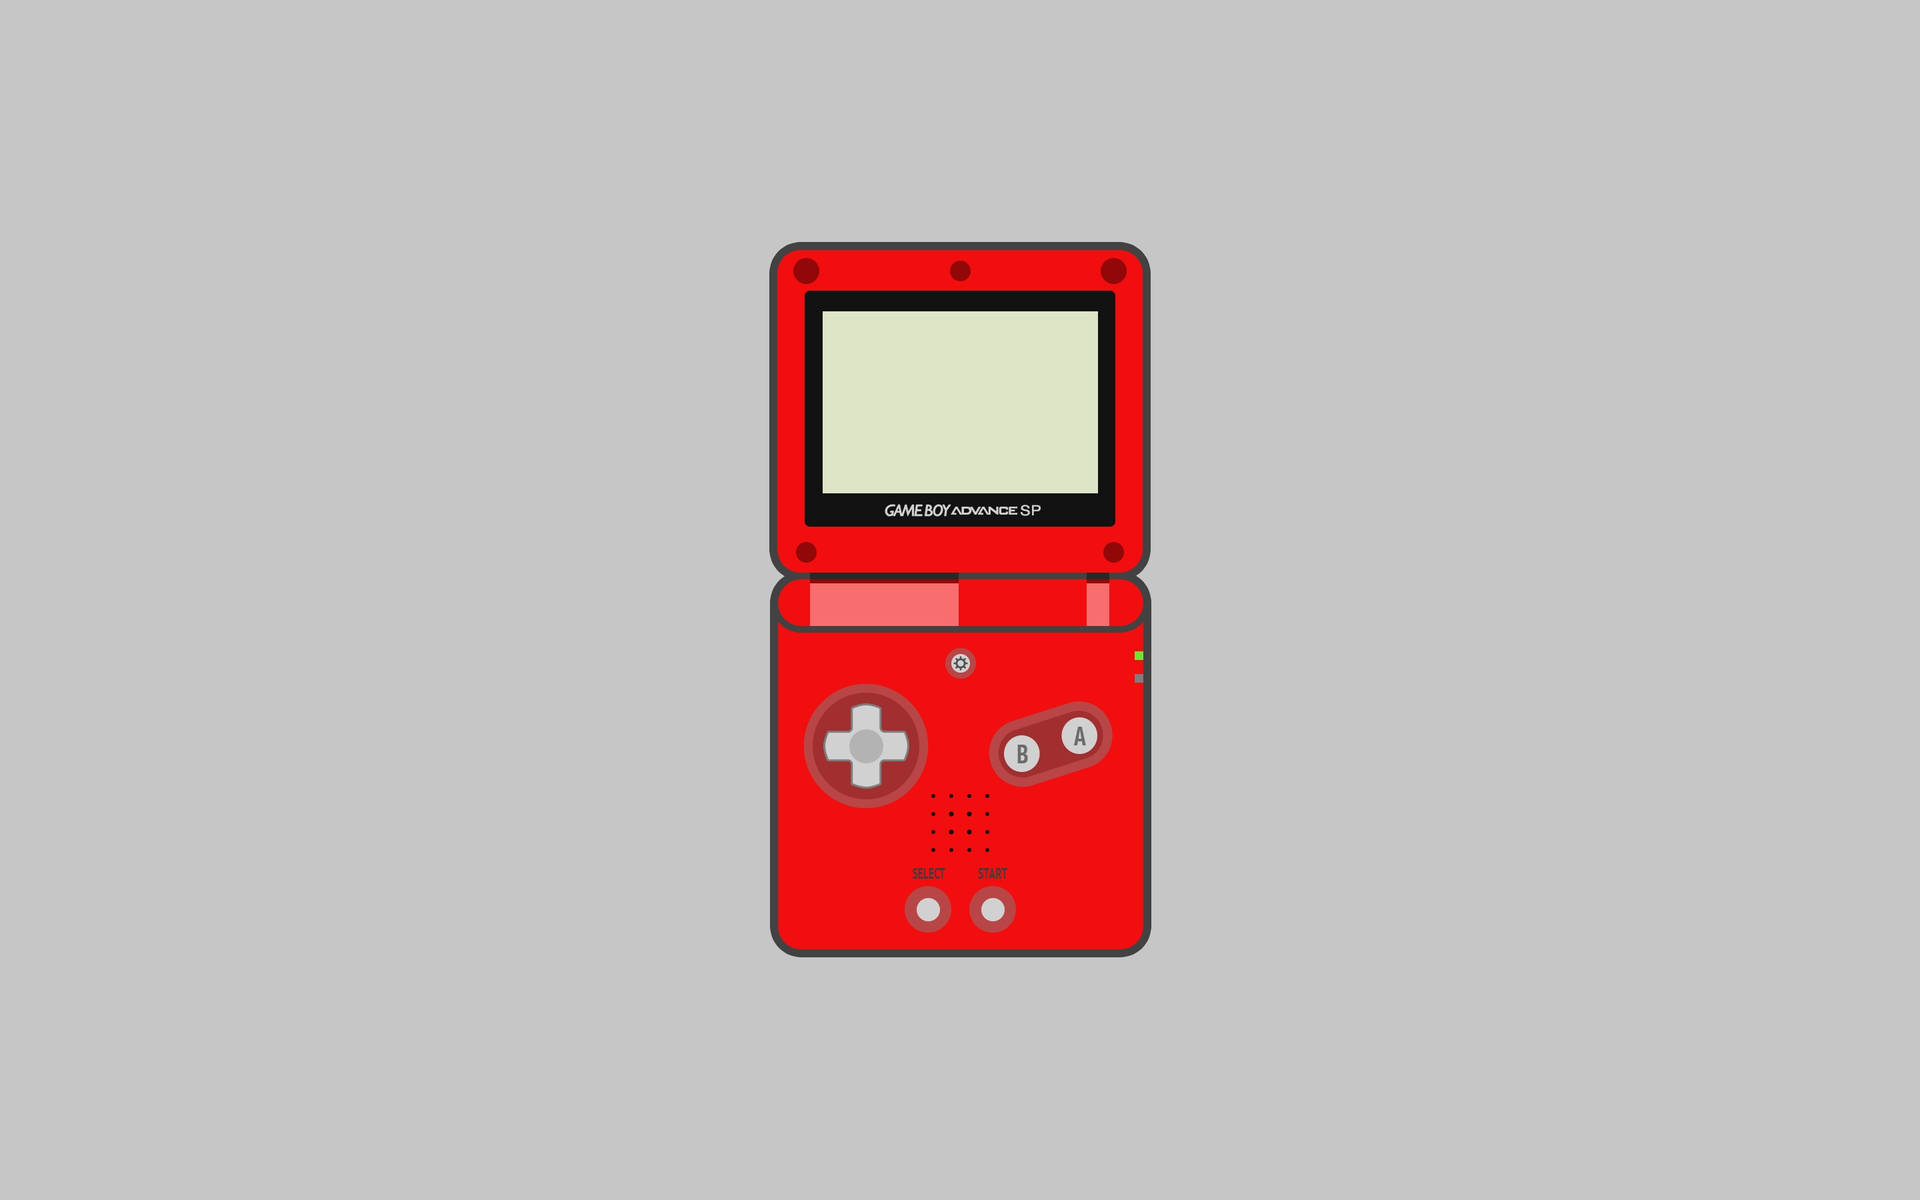 Simple Art Of Red Game Boy Advance Sp Wallpaper